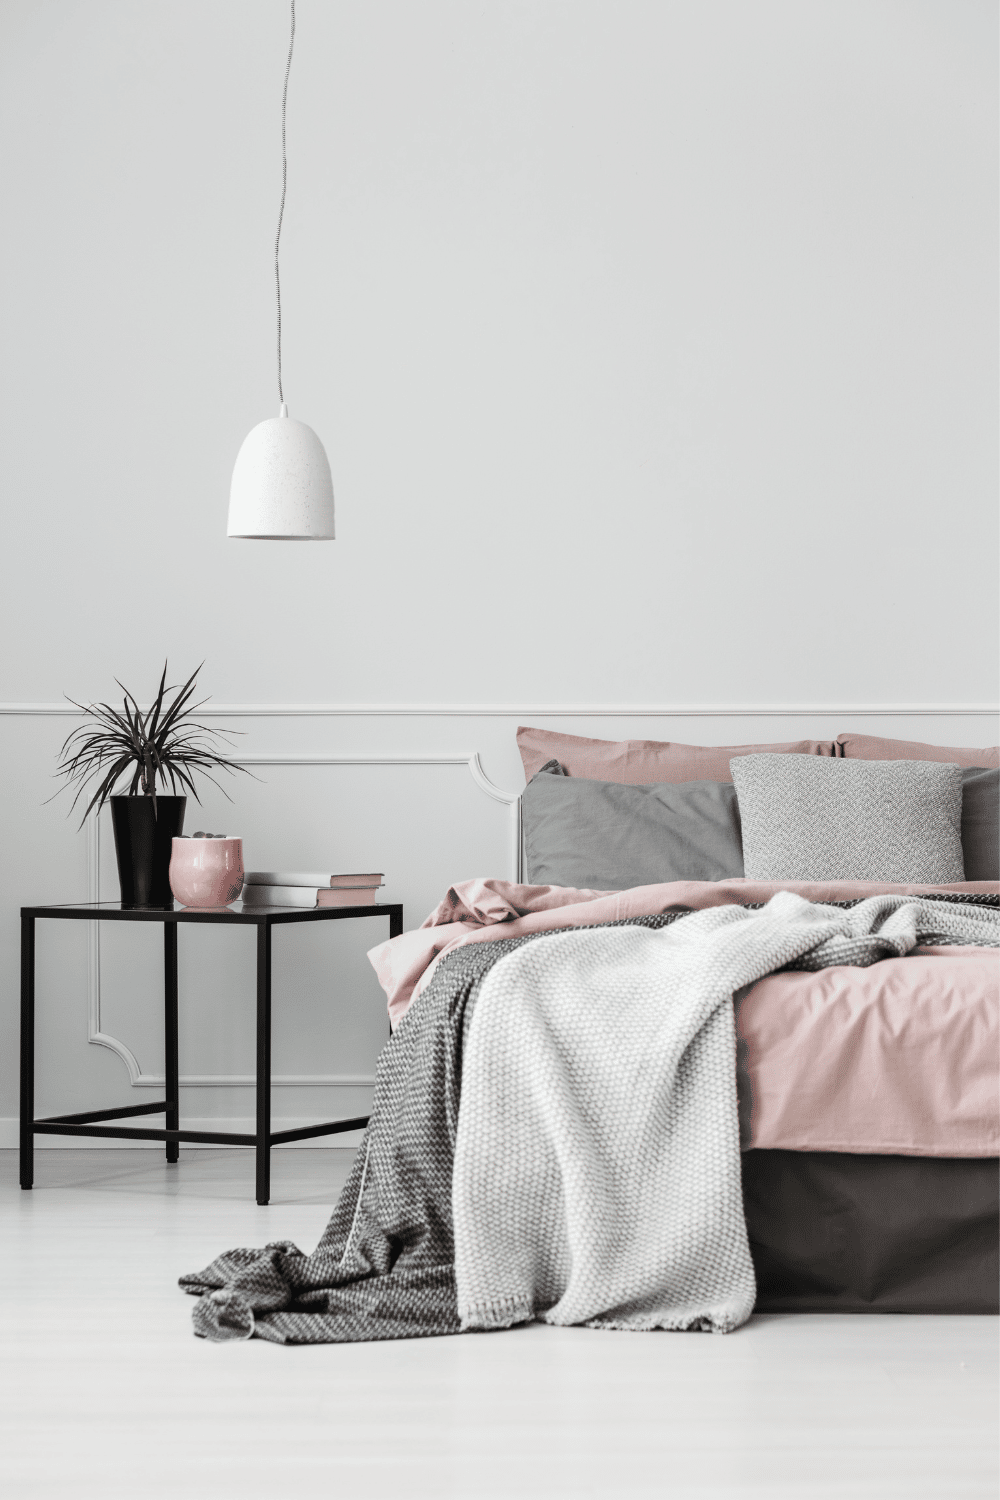 19 Pink and Grey Bedroom Ideas For Adults - Sleek-chic Interiors